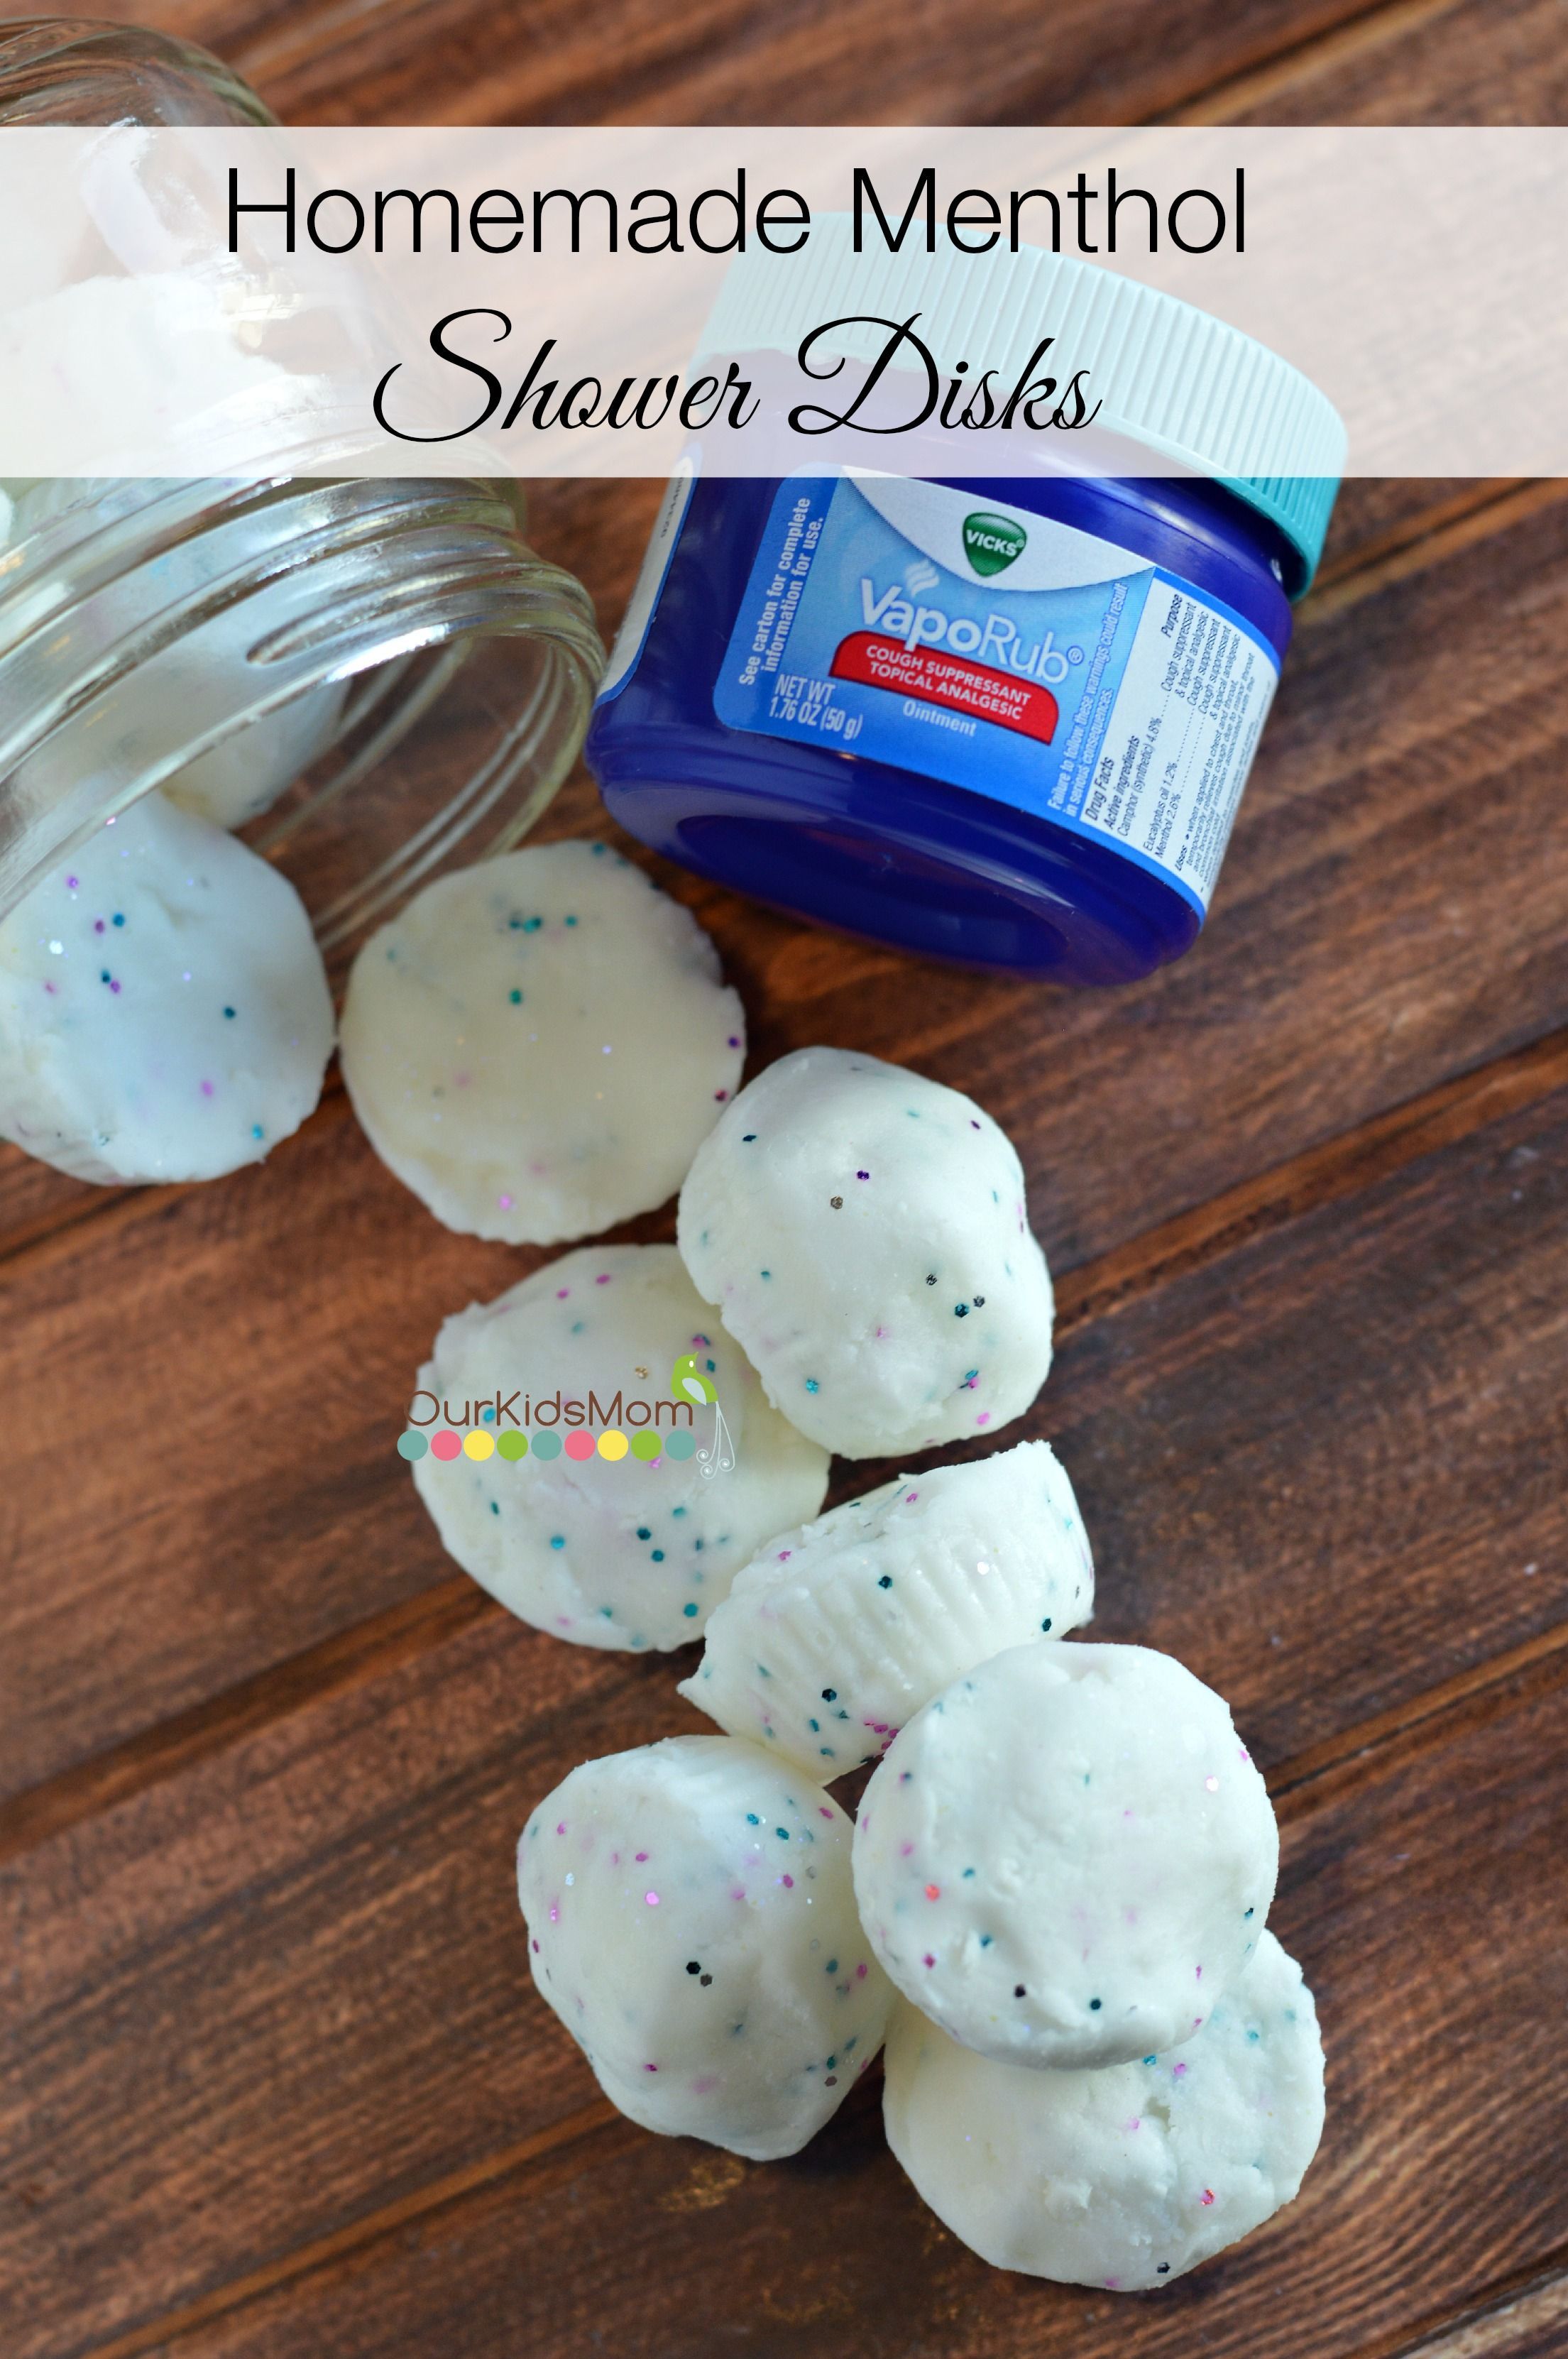 Homemade Vicks Shower Disks. Pop one in your shower for a slow menthol release that helps stuffy noses and